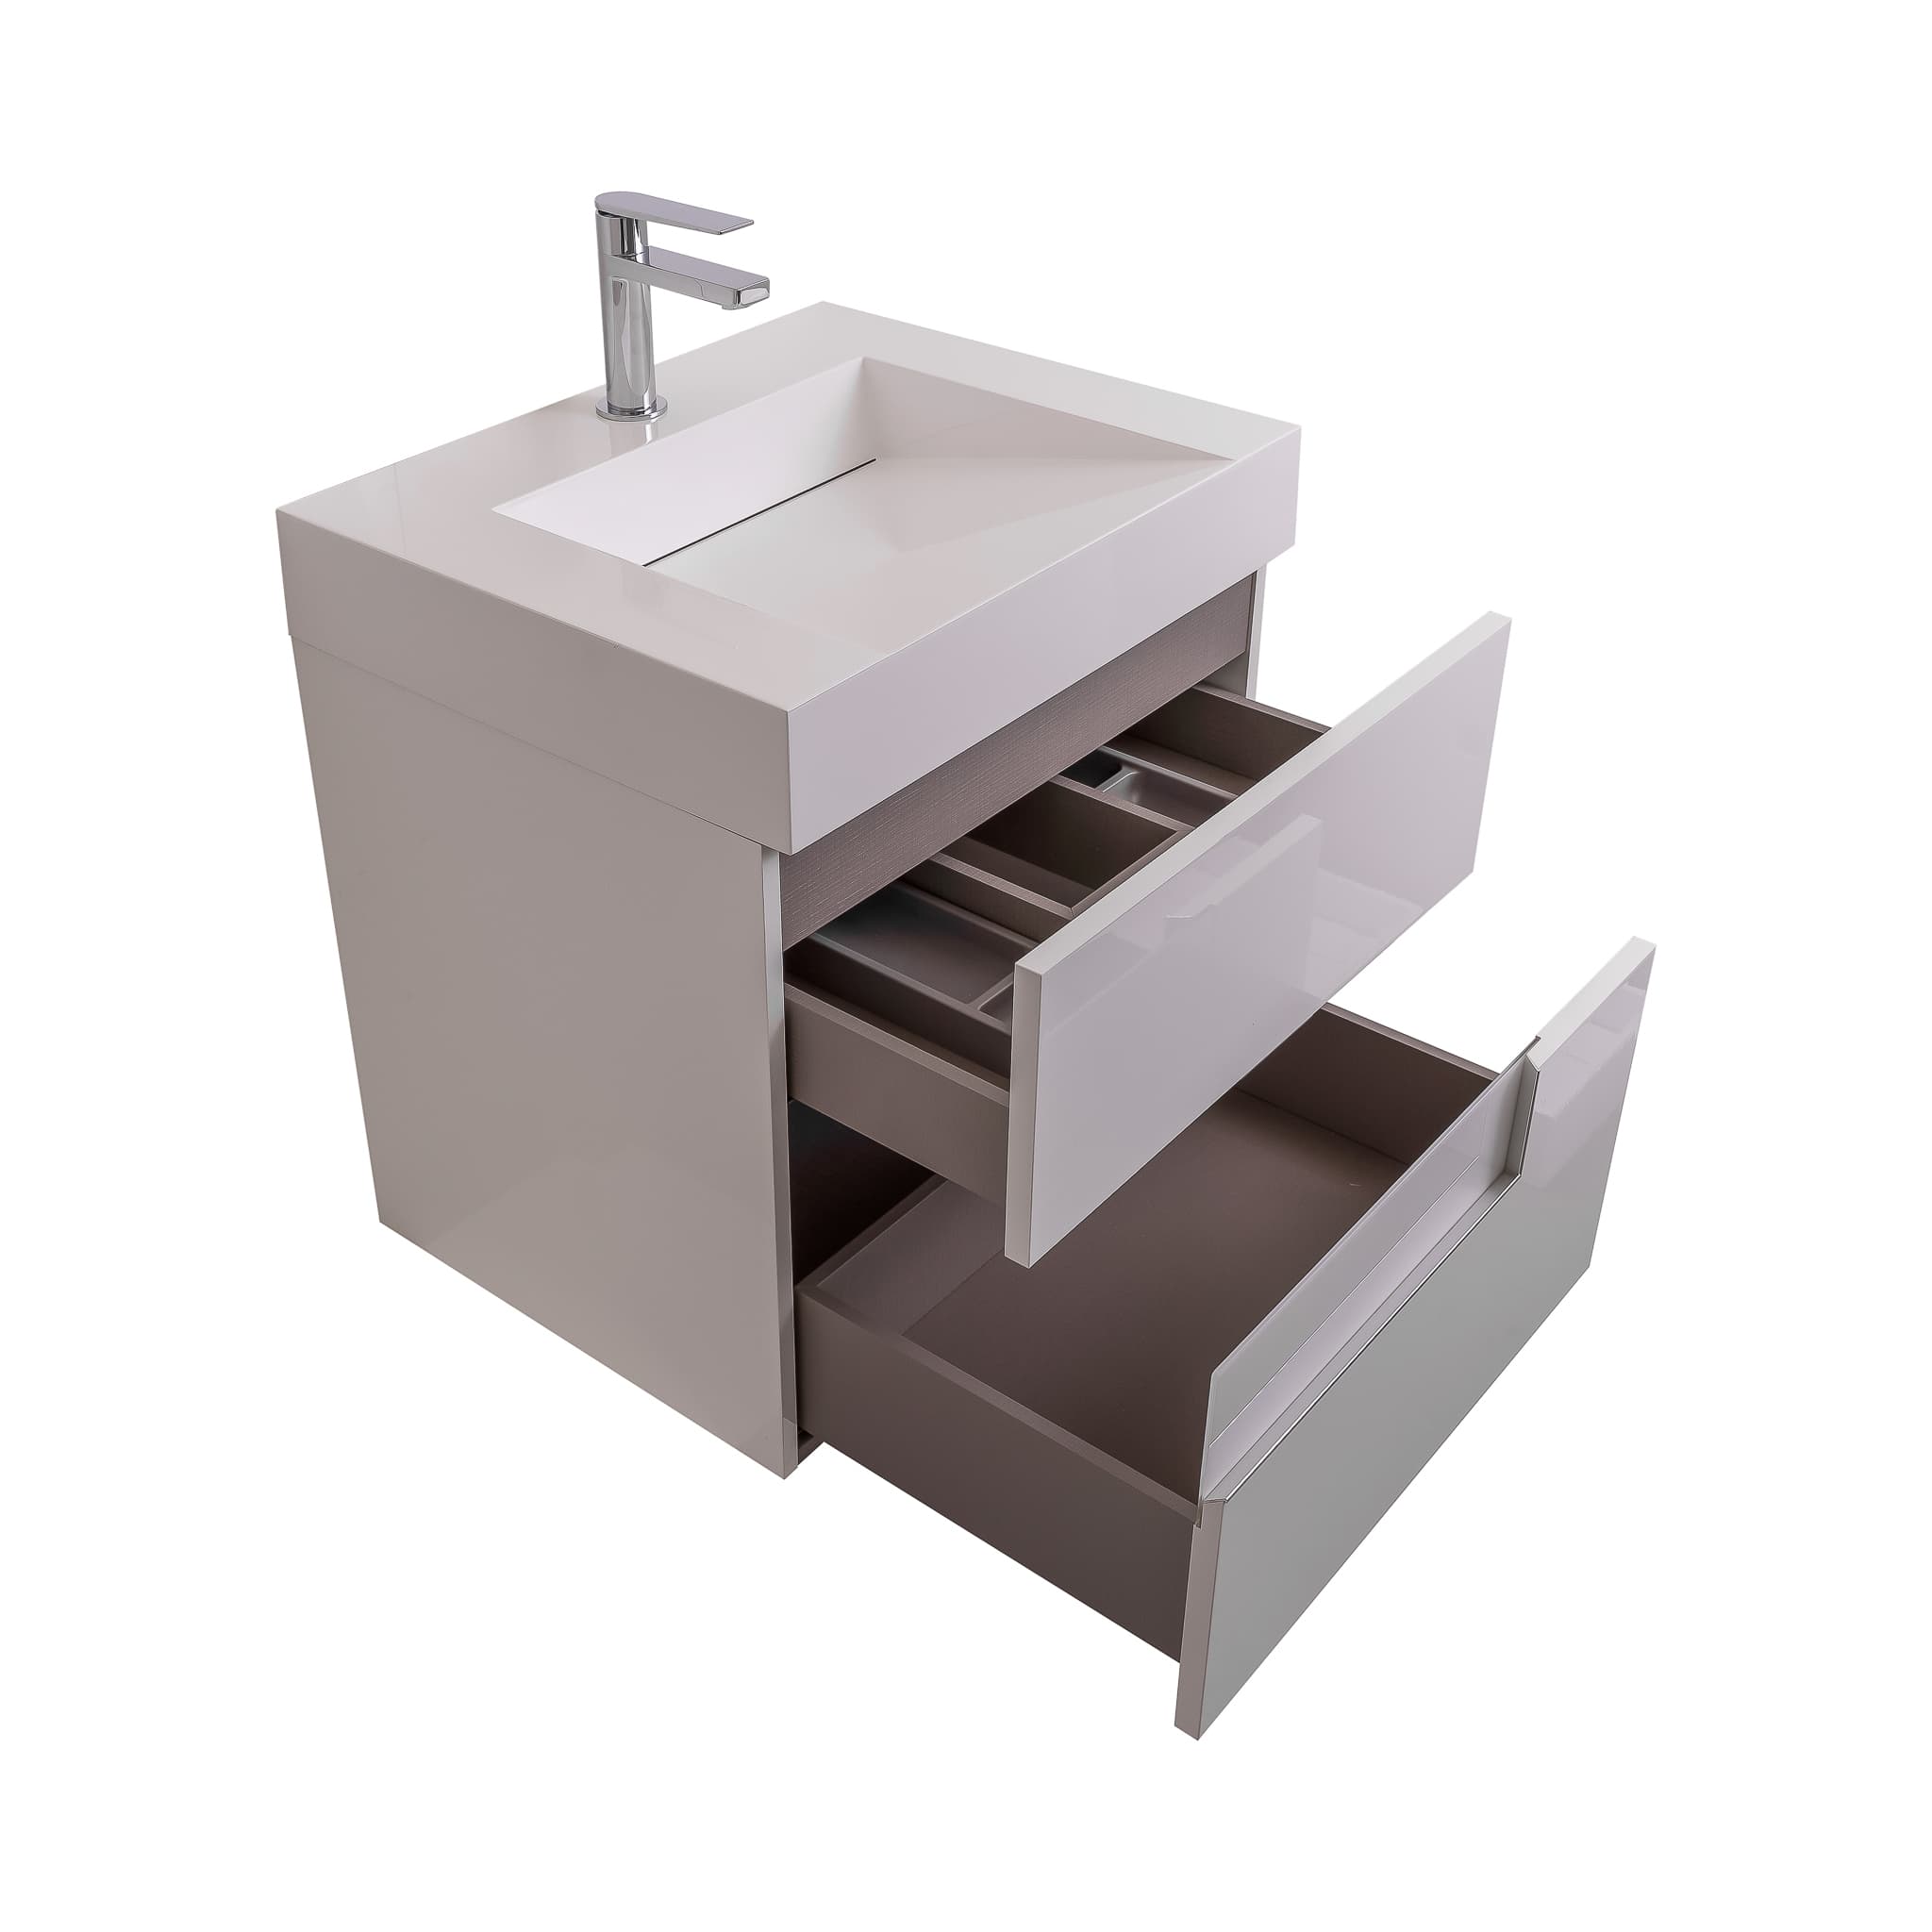 Vision 23.5 White High Gloss Cabinet, Infinity Cultured Marble Sink, Wall Mounted Modern Vanity Set